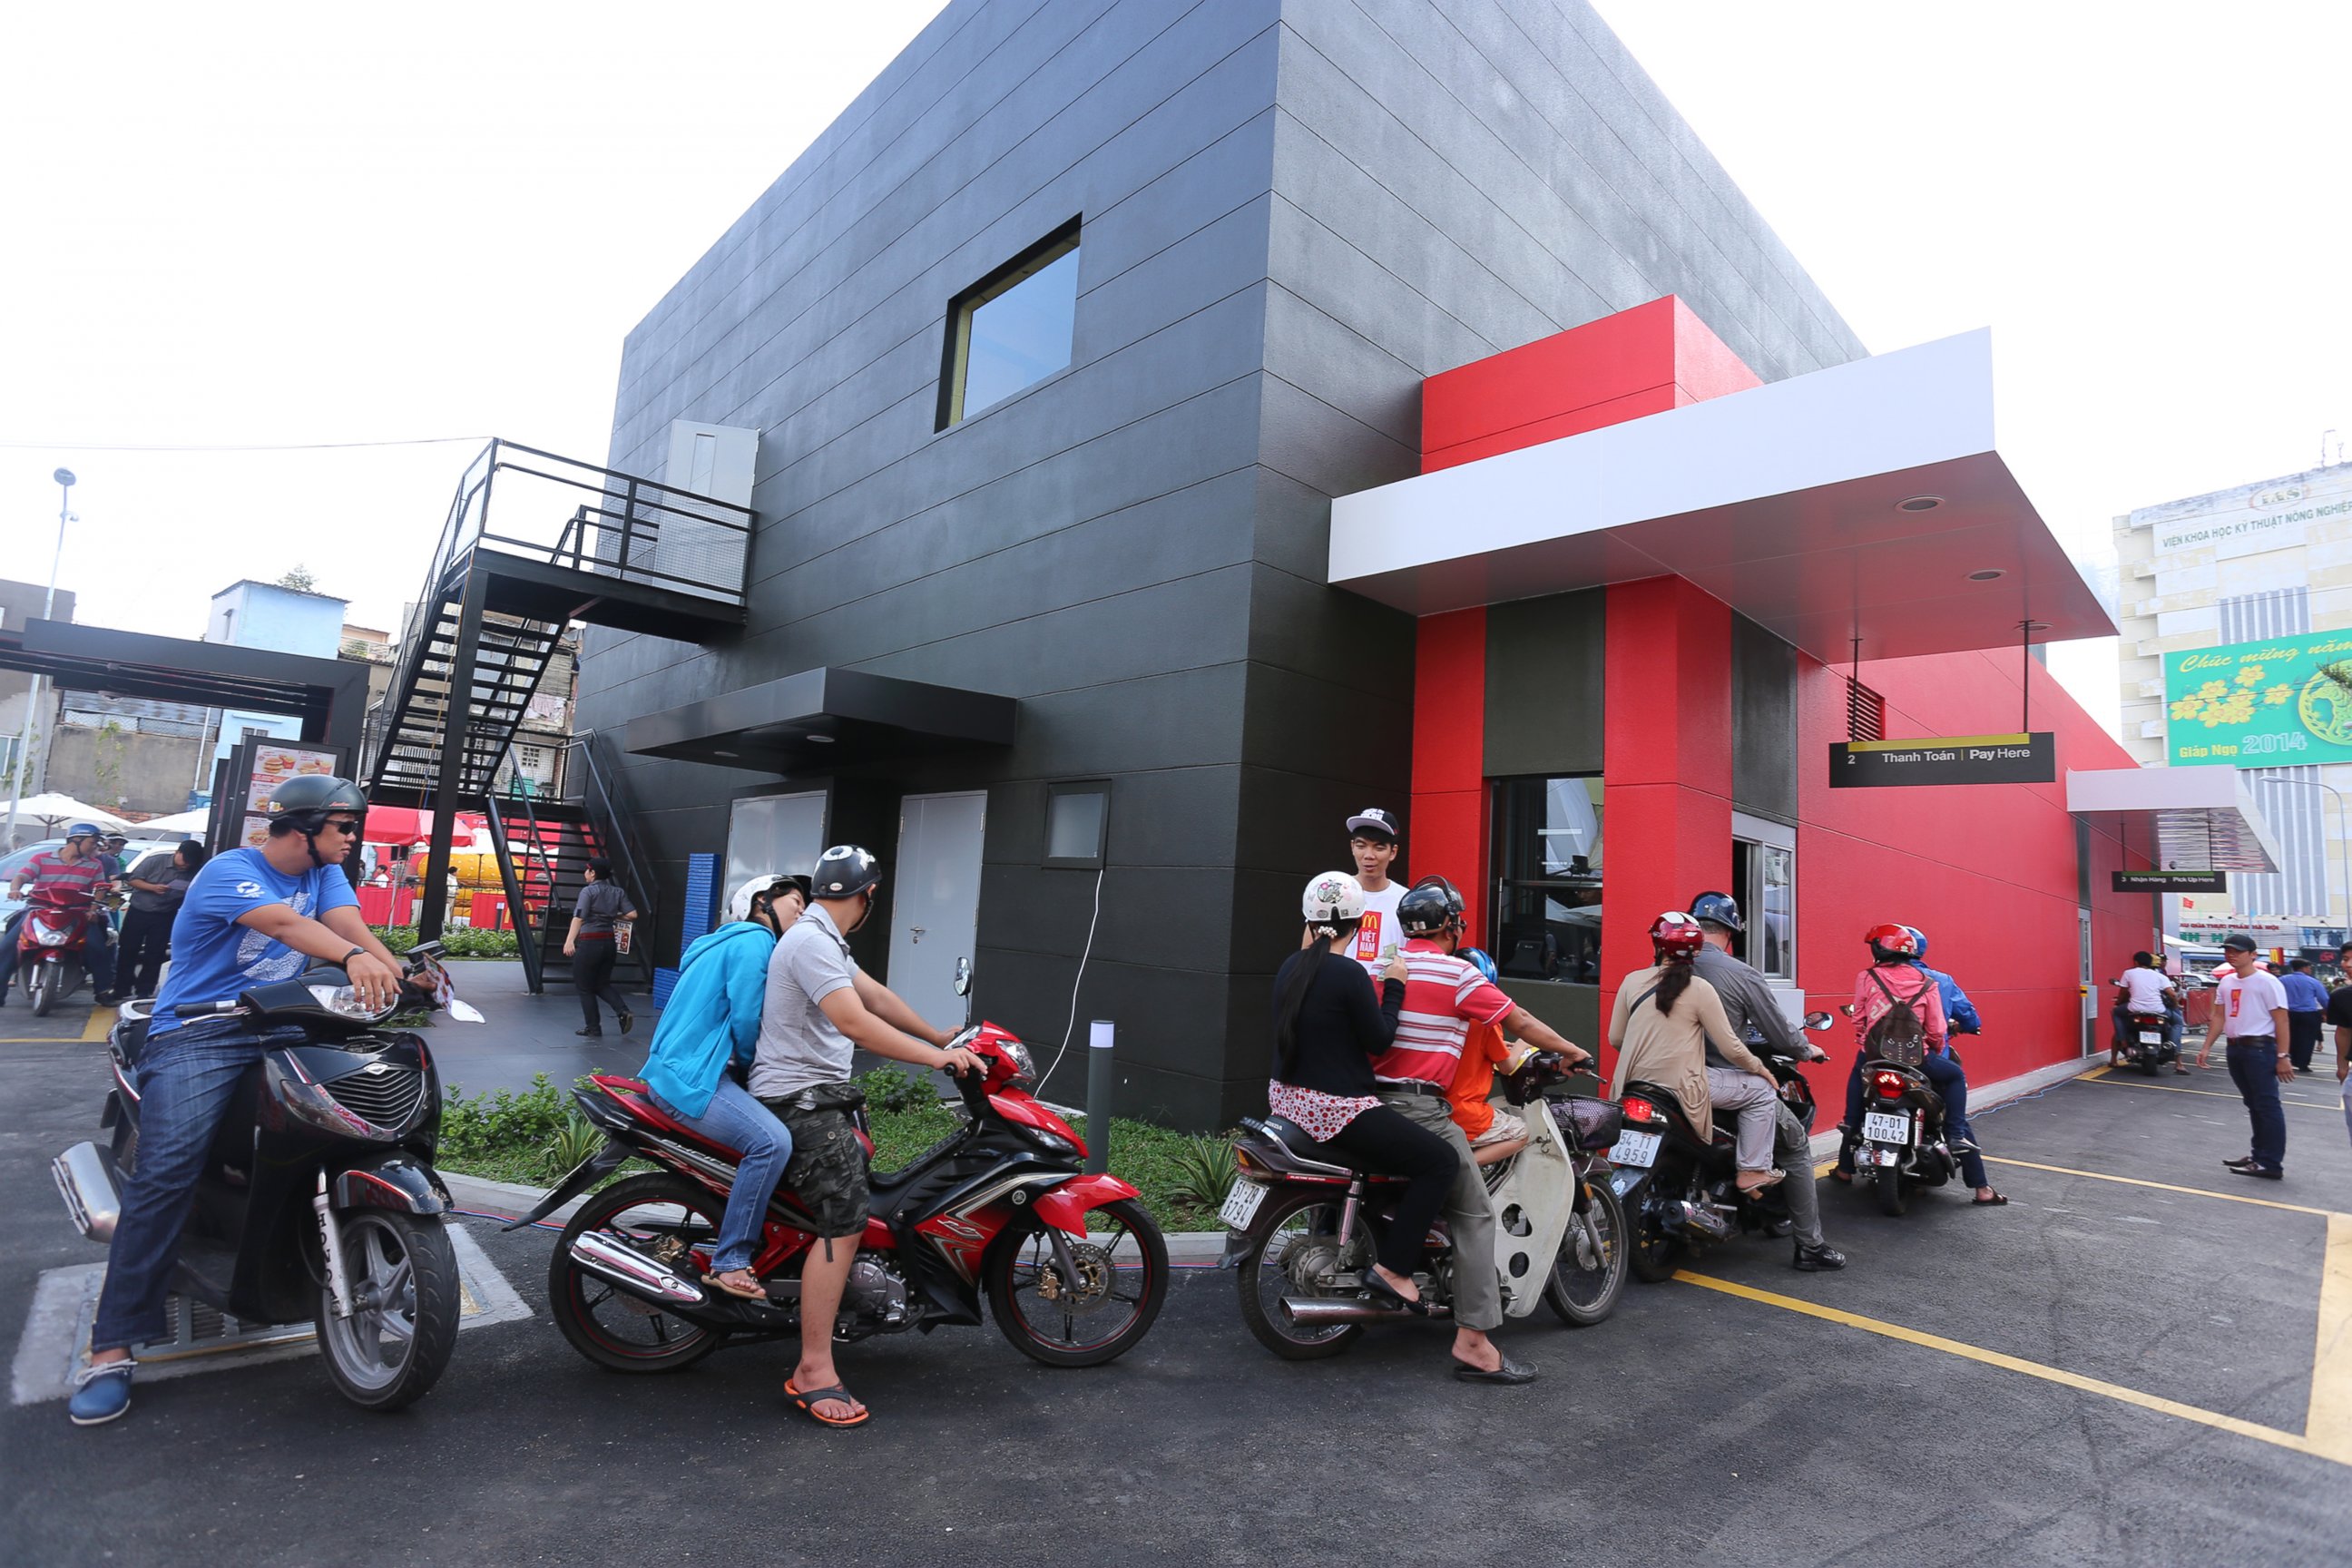 PHOTO: McDonald's customers on scooters experiencing the first drive-thru restaurant in Vietnam